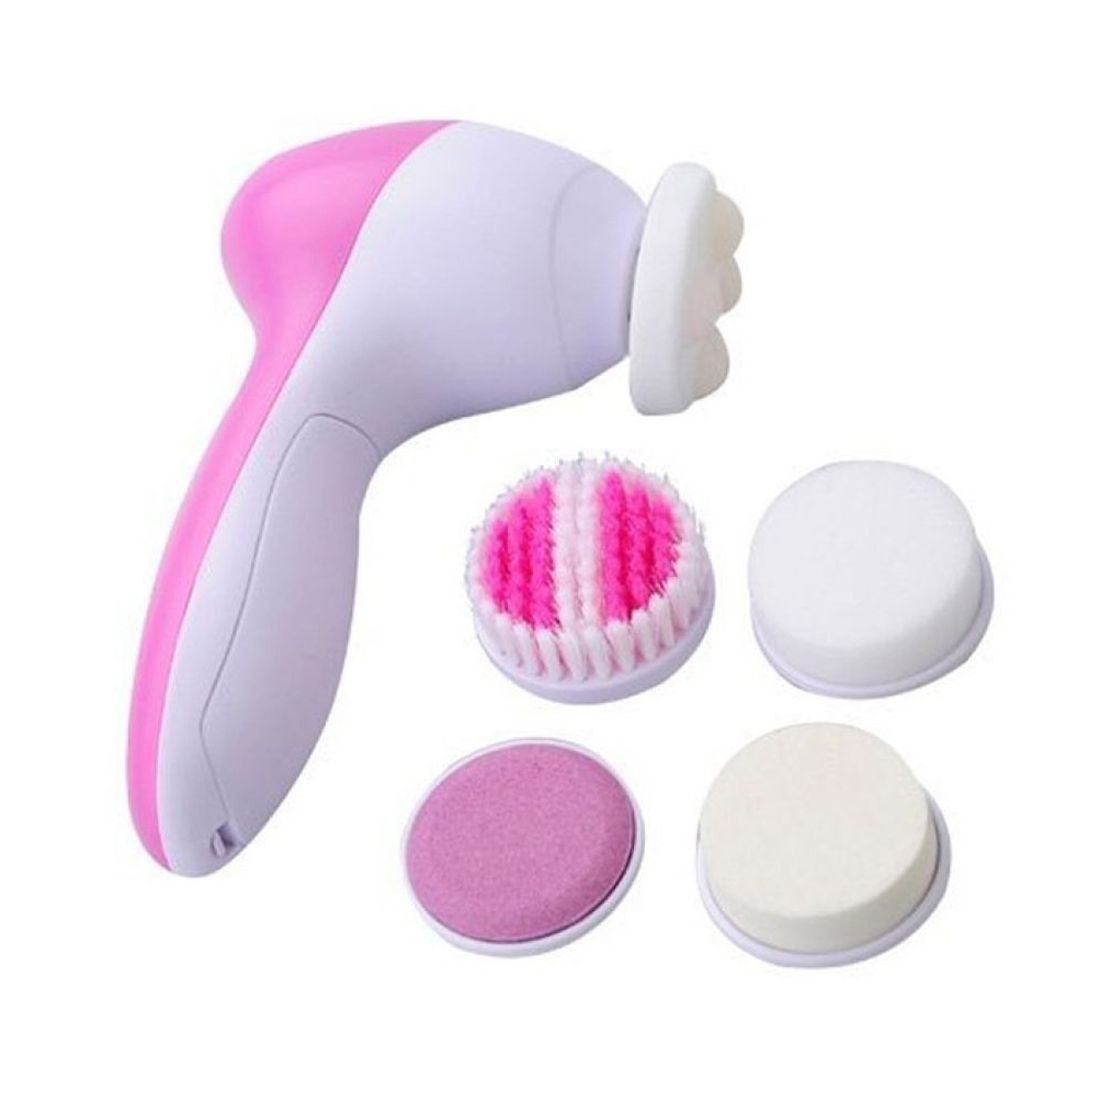     			Bentag Face Massager 5 in 1